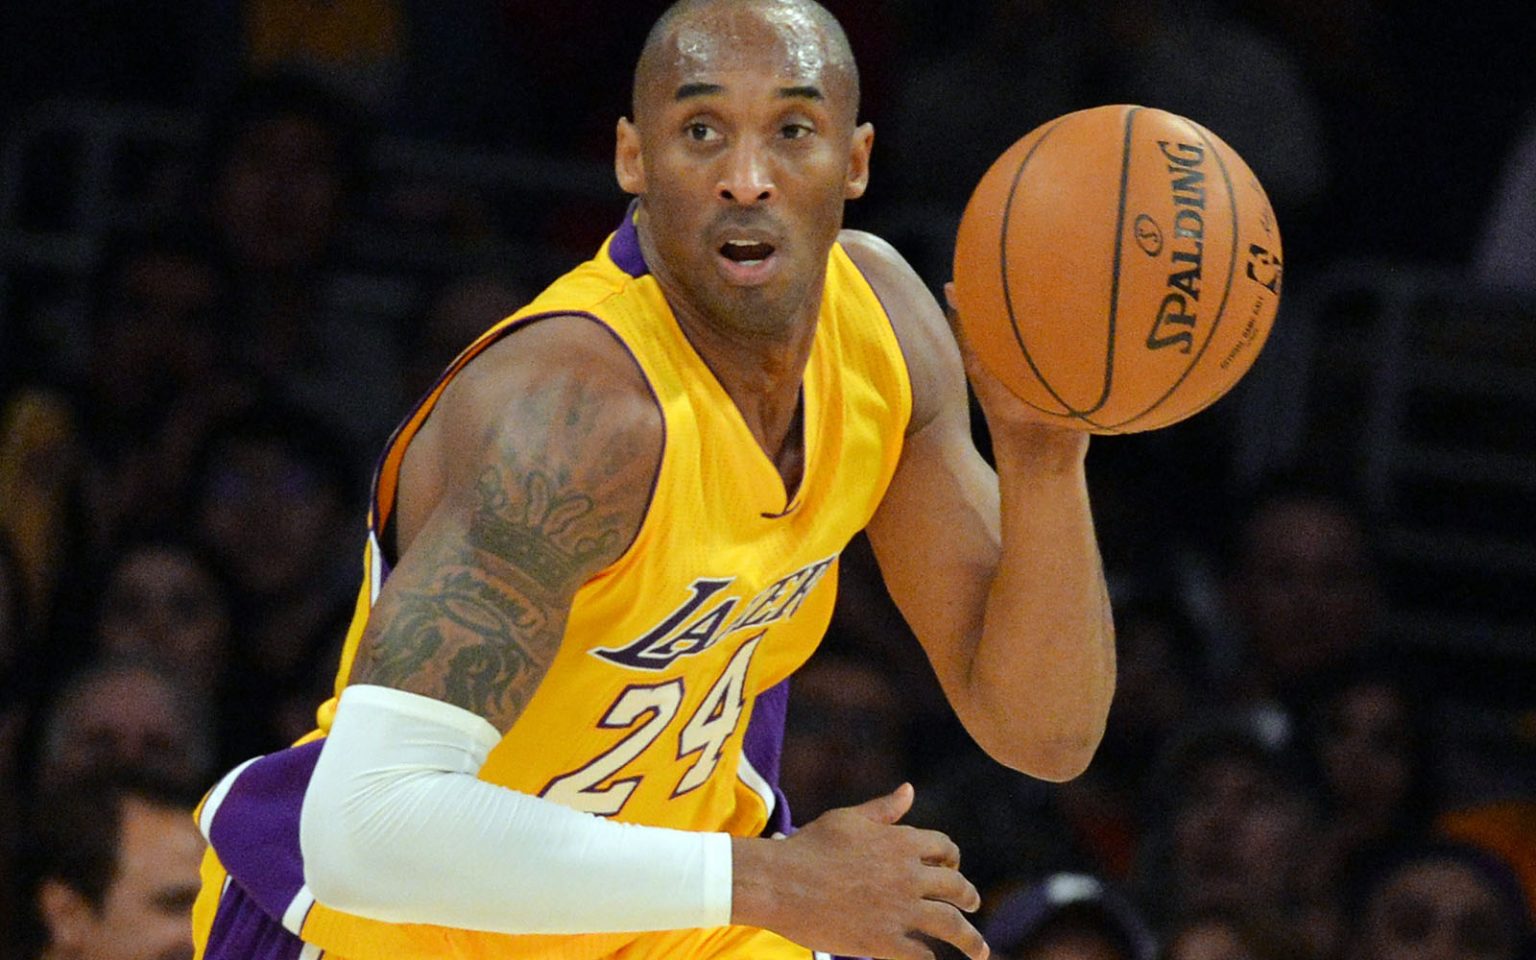 Kobe Bryant Family Pictures, Wife, Parents, Daughters, Age, Height